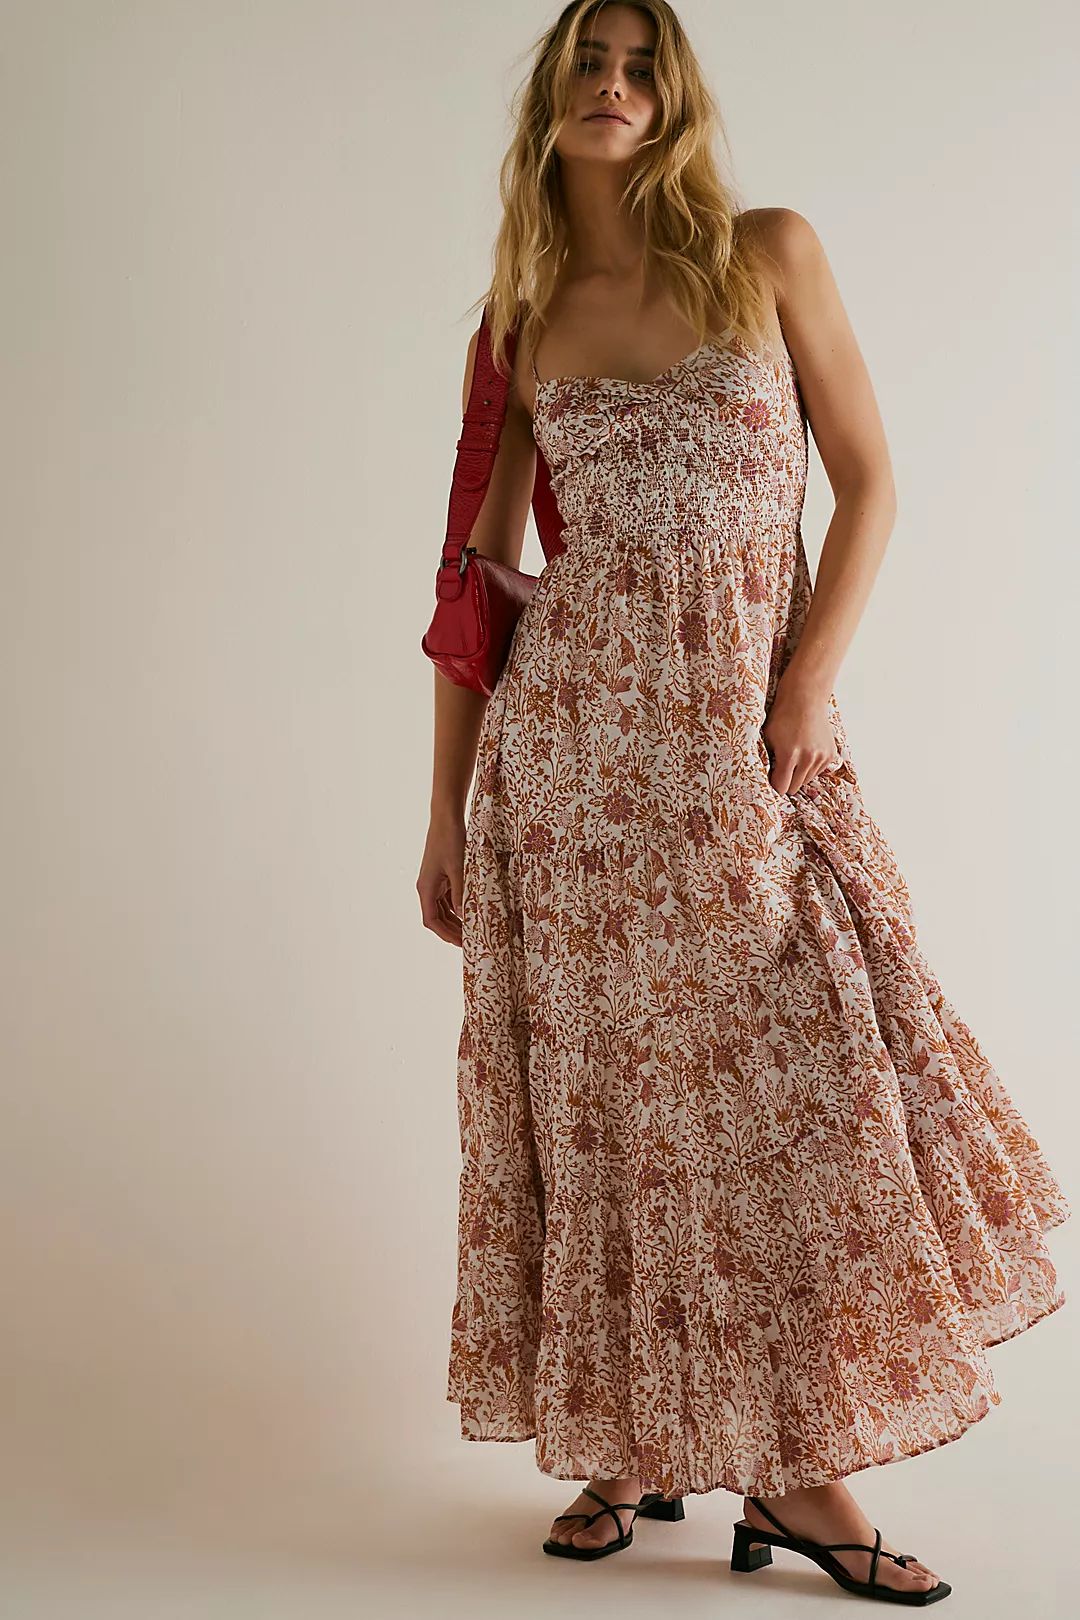 Sundrenched Printed Maxi Dress | Free People (UK)